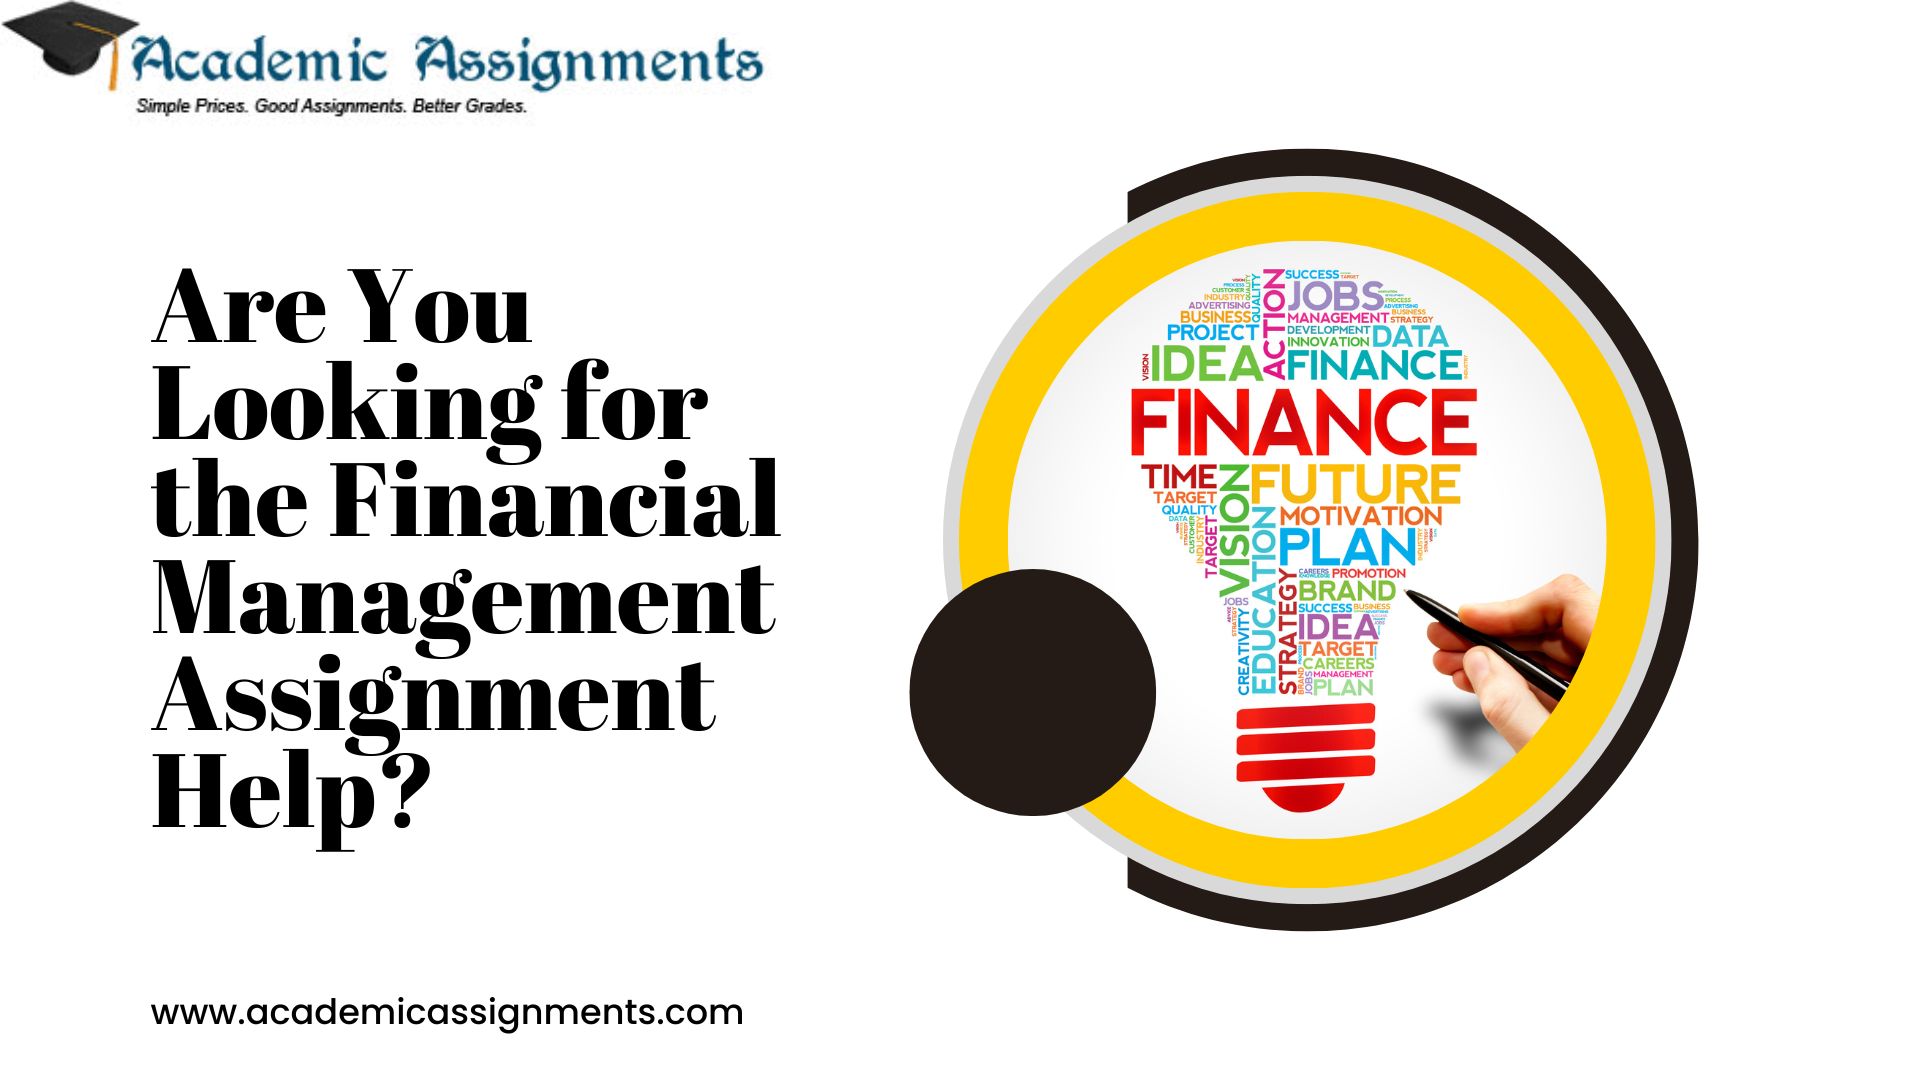 Are You Looking for the Financial Management Assignment Help